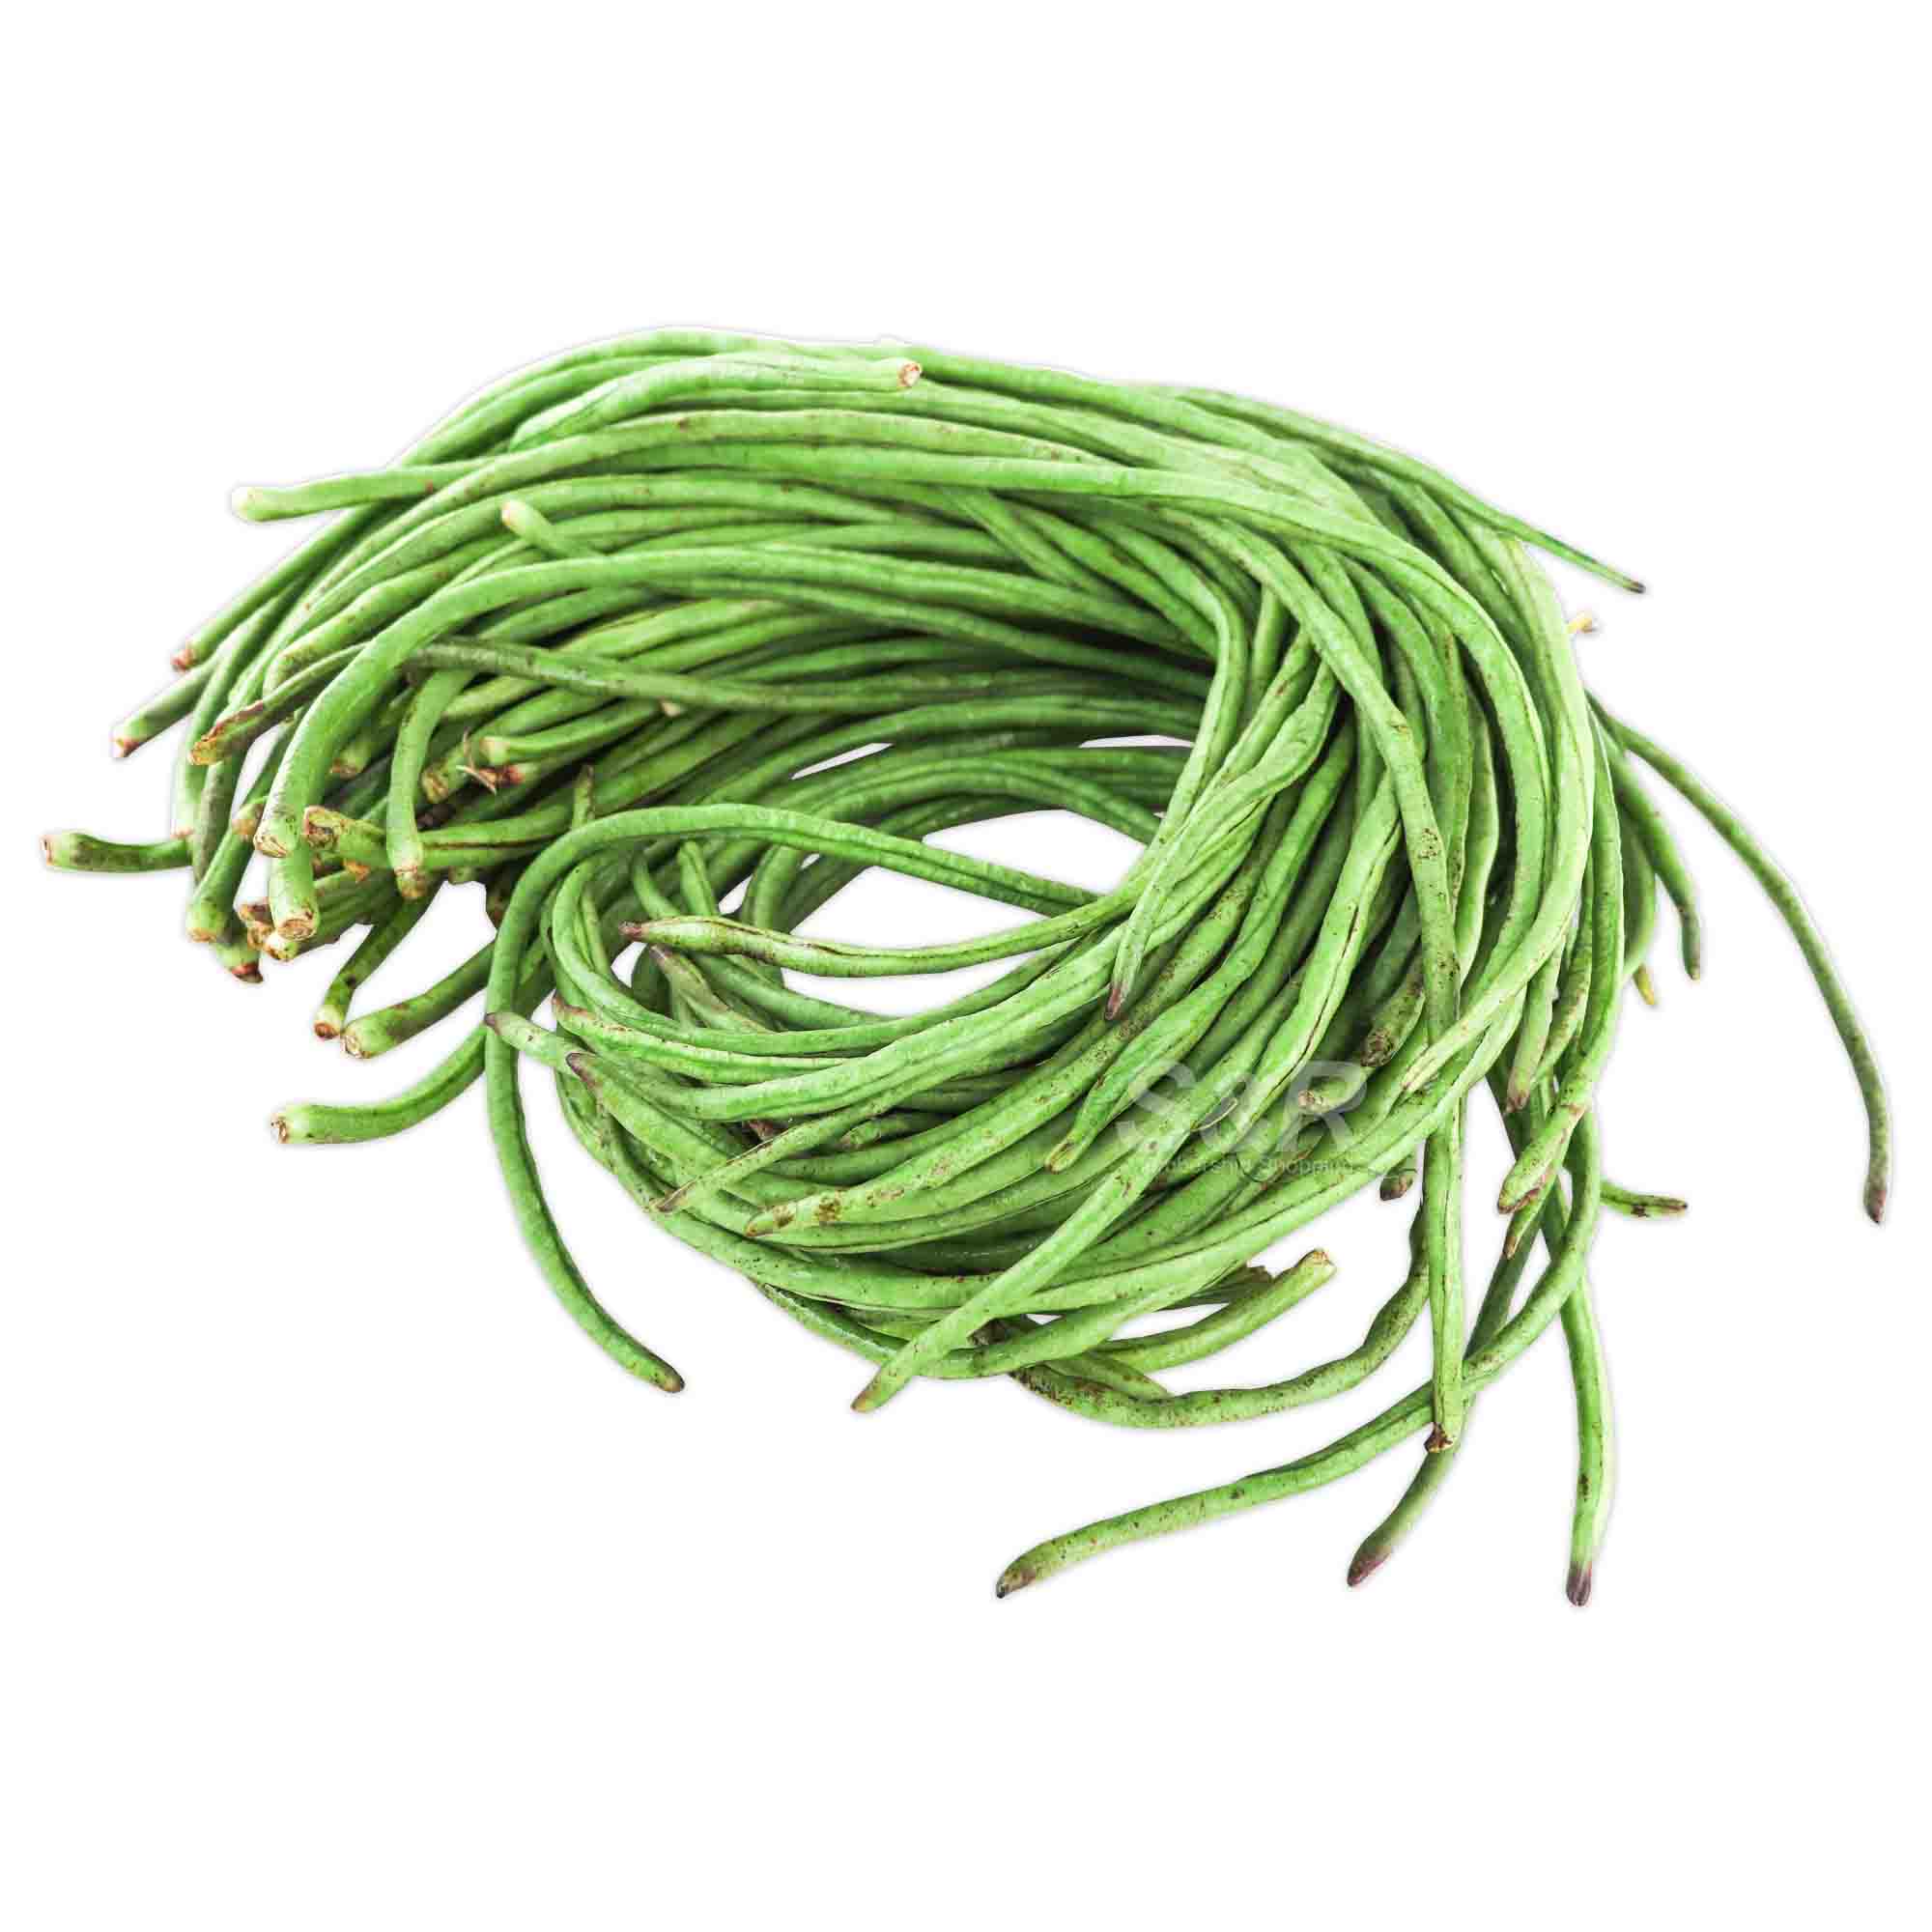 S&R String Beans approx. 400g